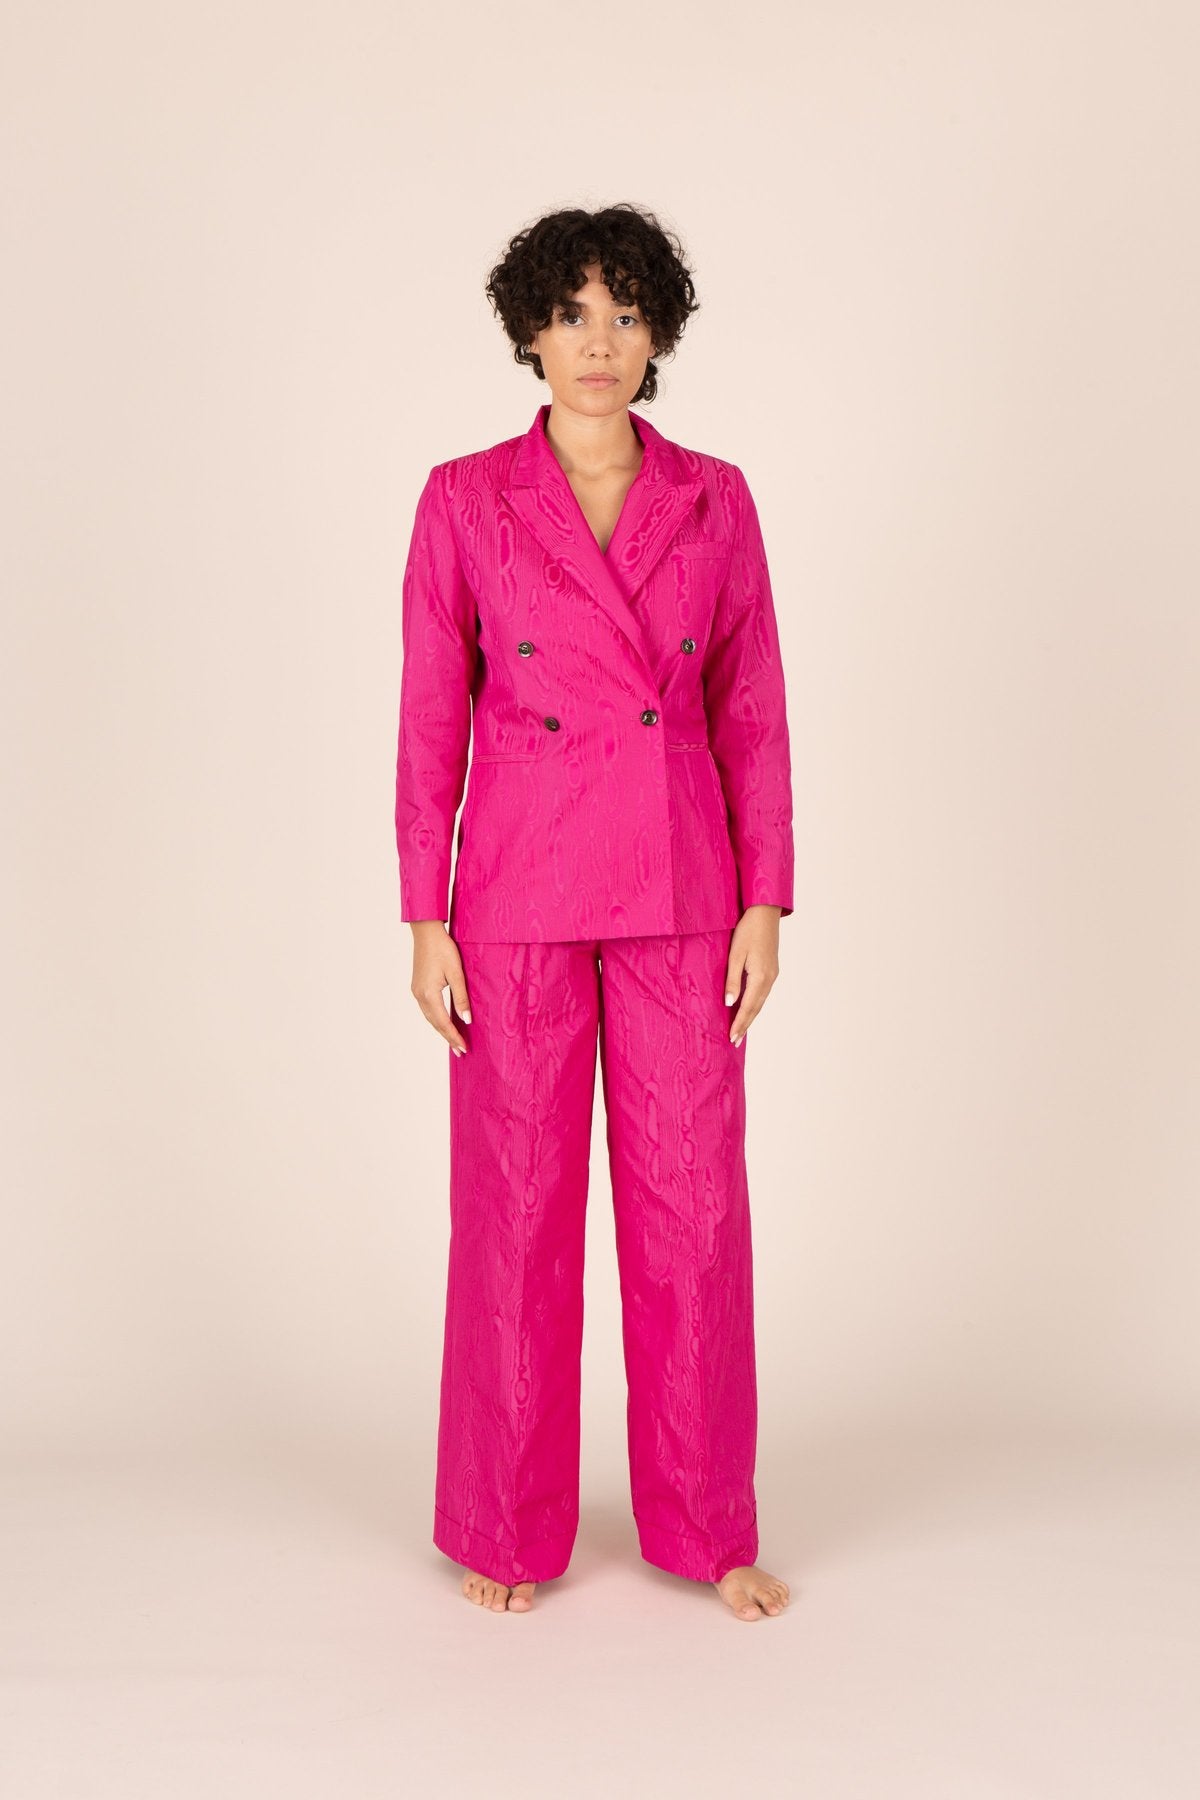 Load image into Gallery viewer, Souer Hot Pink Trousers - nwt
